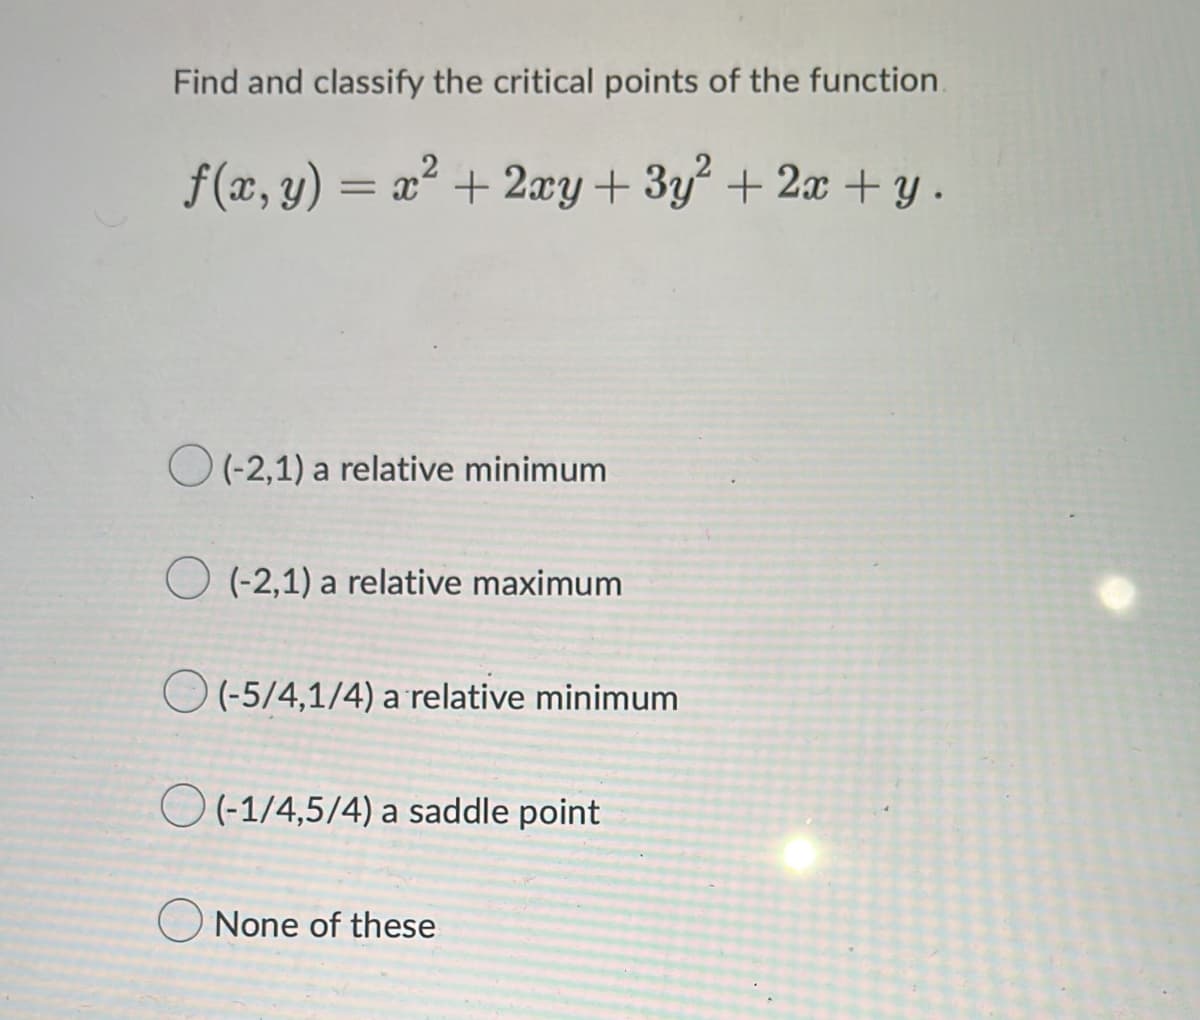 Find and classify the critical points of the function.
f(x, y)
= x + 2xy+ 3y+ 2x +y.
O (-2,1) a relative minimum
O (-2,1) a relative maximum
O (-5/4,1/4) a relative minimum
O (-1/4,5/4) a saddle point
None of these
